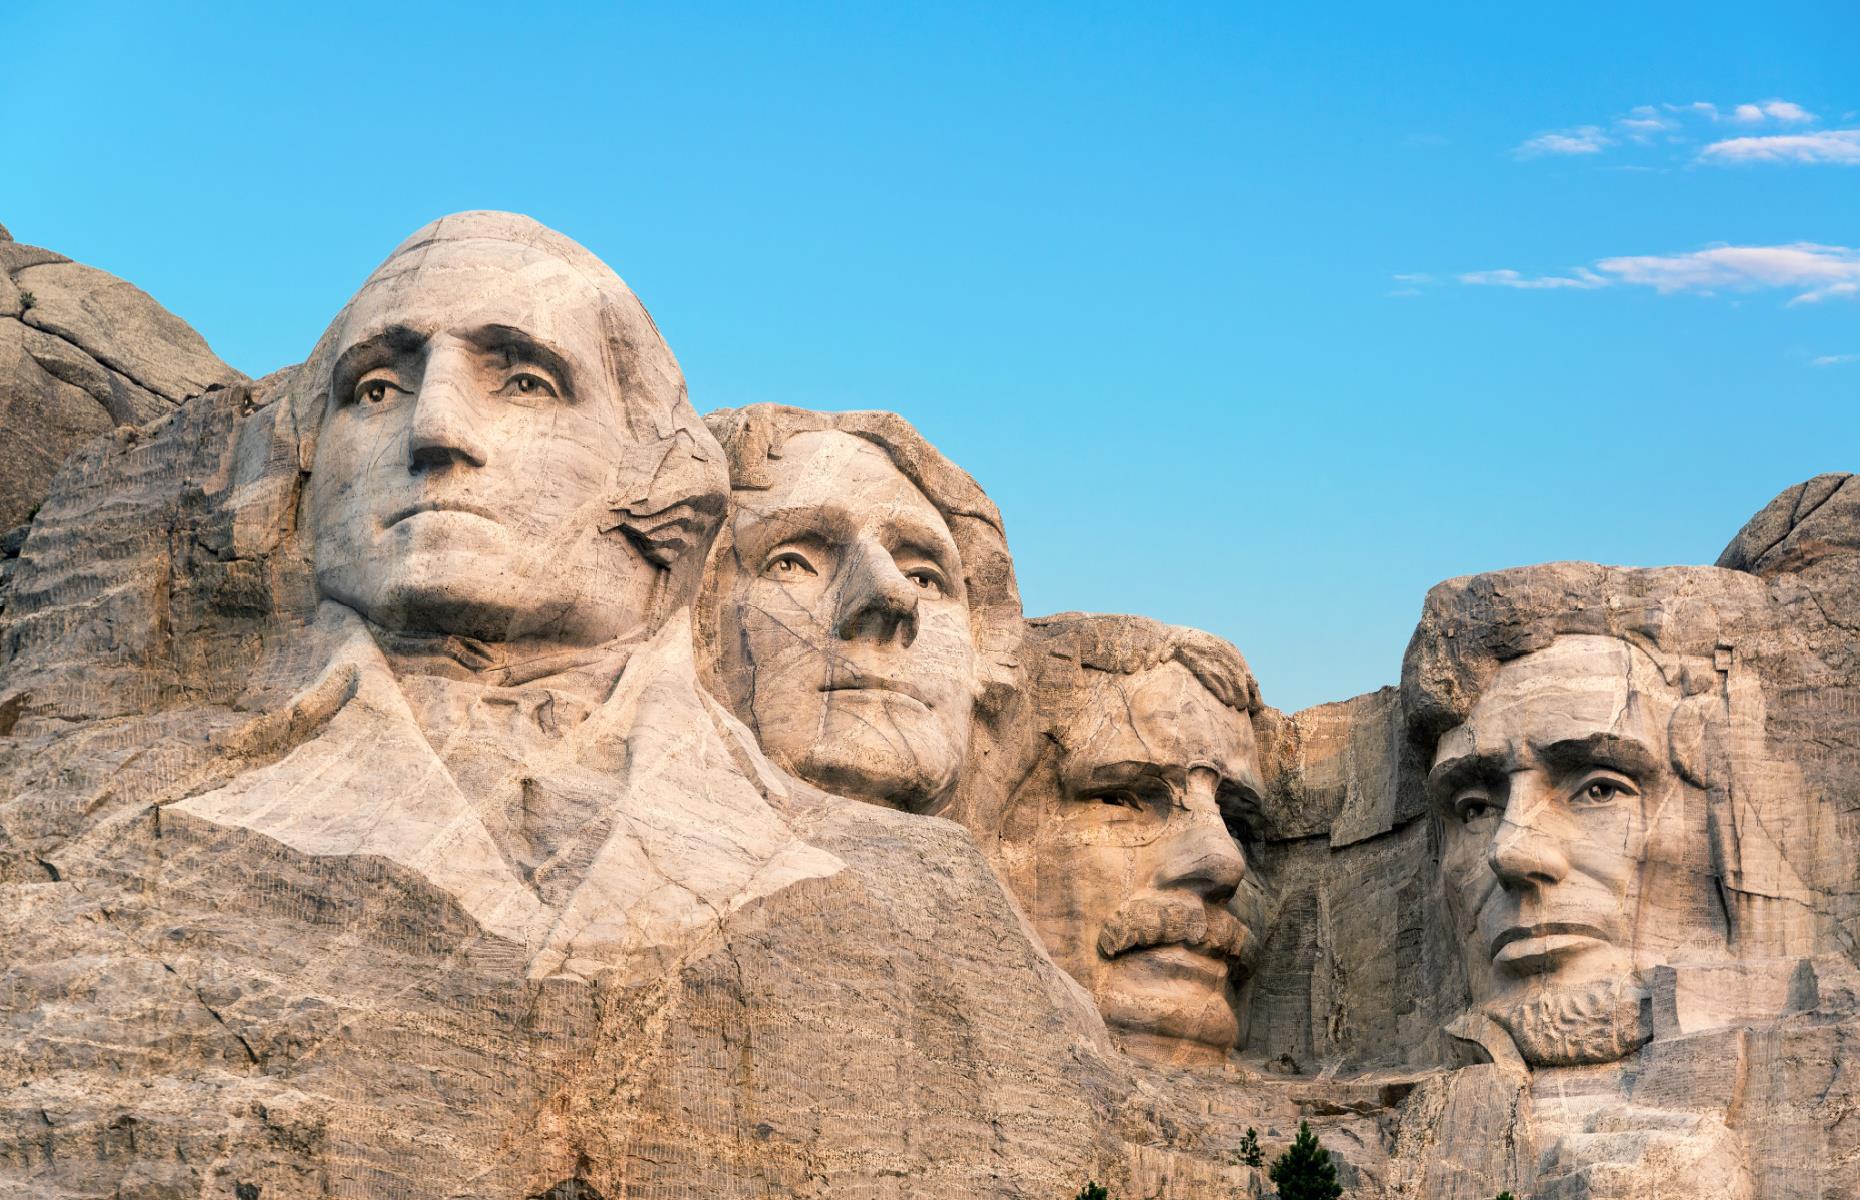 <p>No presidential monument is more impactful than Mount Rushmore, conceived as a dedication to represent the birth, growth, development, and preservation of the United States through four former presidents. Carved into a natural rock face, completed in 1941, it's an impressive site to visit and <a href="https://www.nps.gov/moru/planyourvisit/ranger-programs.htm">daily free ranger talks</a> between June and September help add context. Erected on Lakota grounds in the Black Hills, don't miss an opportunity to discover the controversy it brought at the Lakota, Nakota and Dakota Heritage Village along the first section of the Presidential Trail.</p>